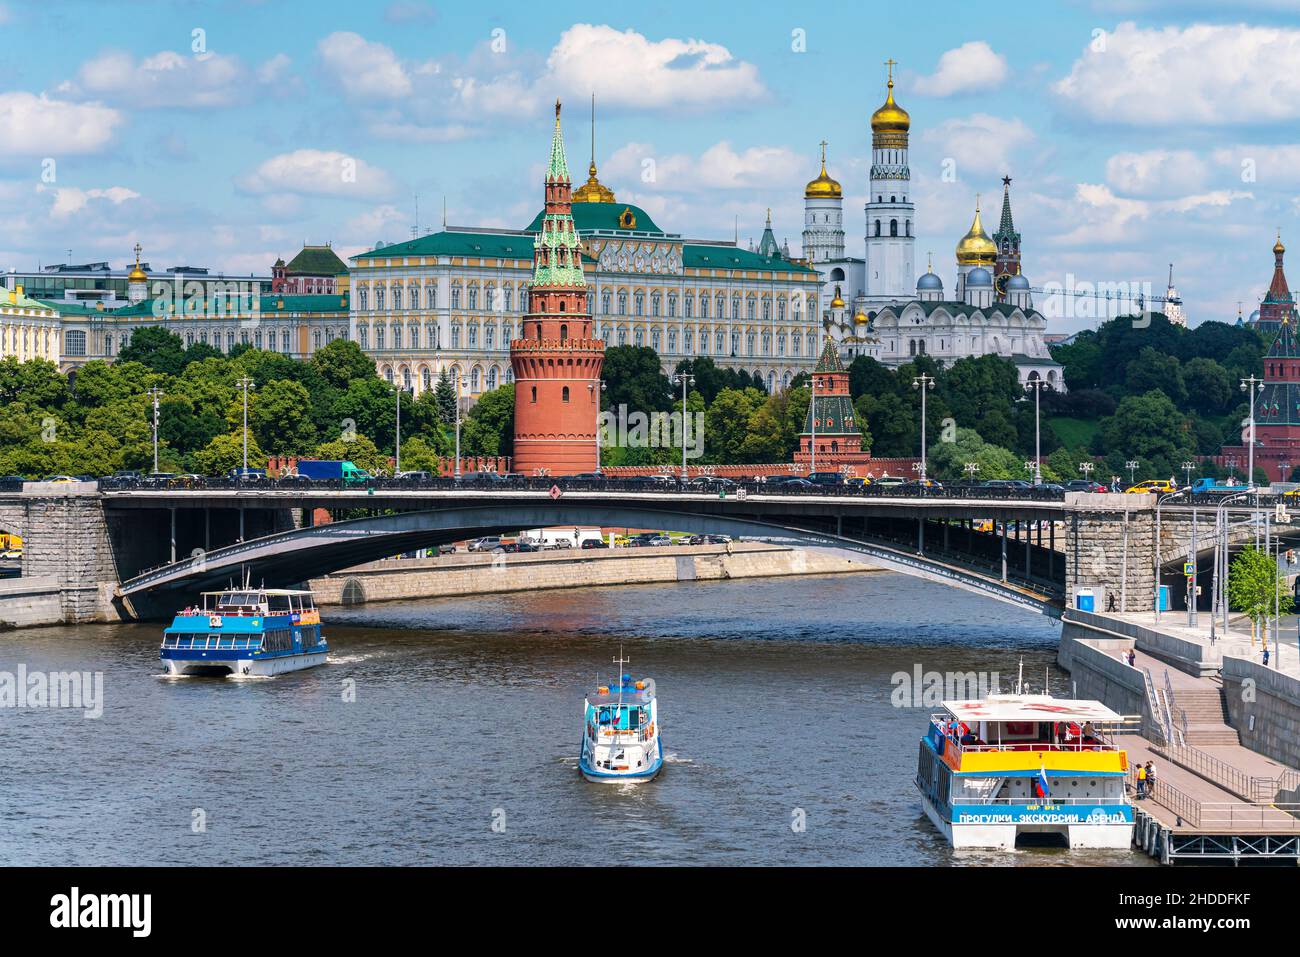 Moscow, Russia - June 26, 2020: The Moscow Kremlin is a citadel of Russian power. Panoramic view of the Kremlin, Moscow River with steamers, Bolshoi Kamenny bridge. High quality photo Stock Photo